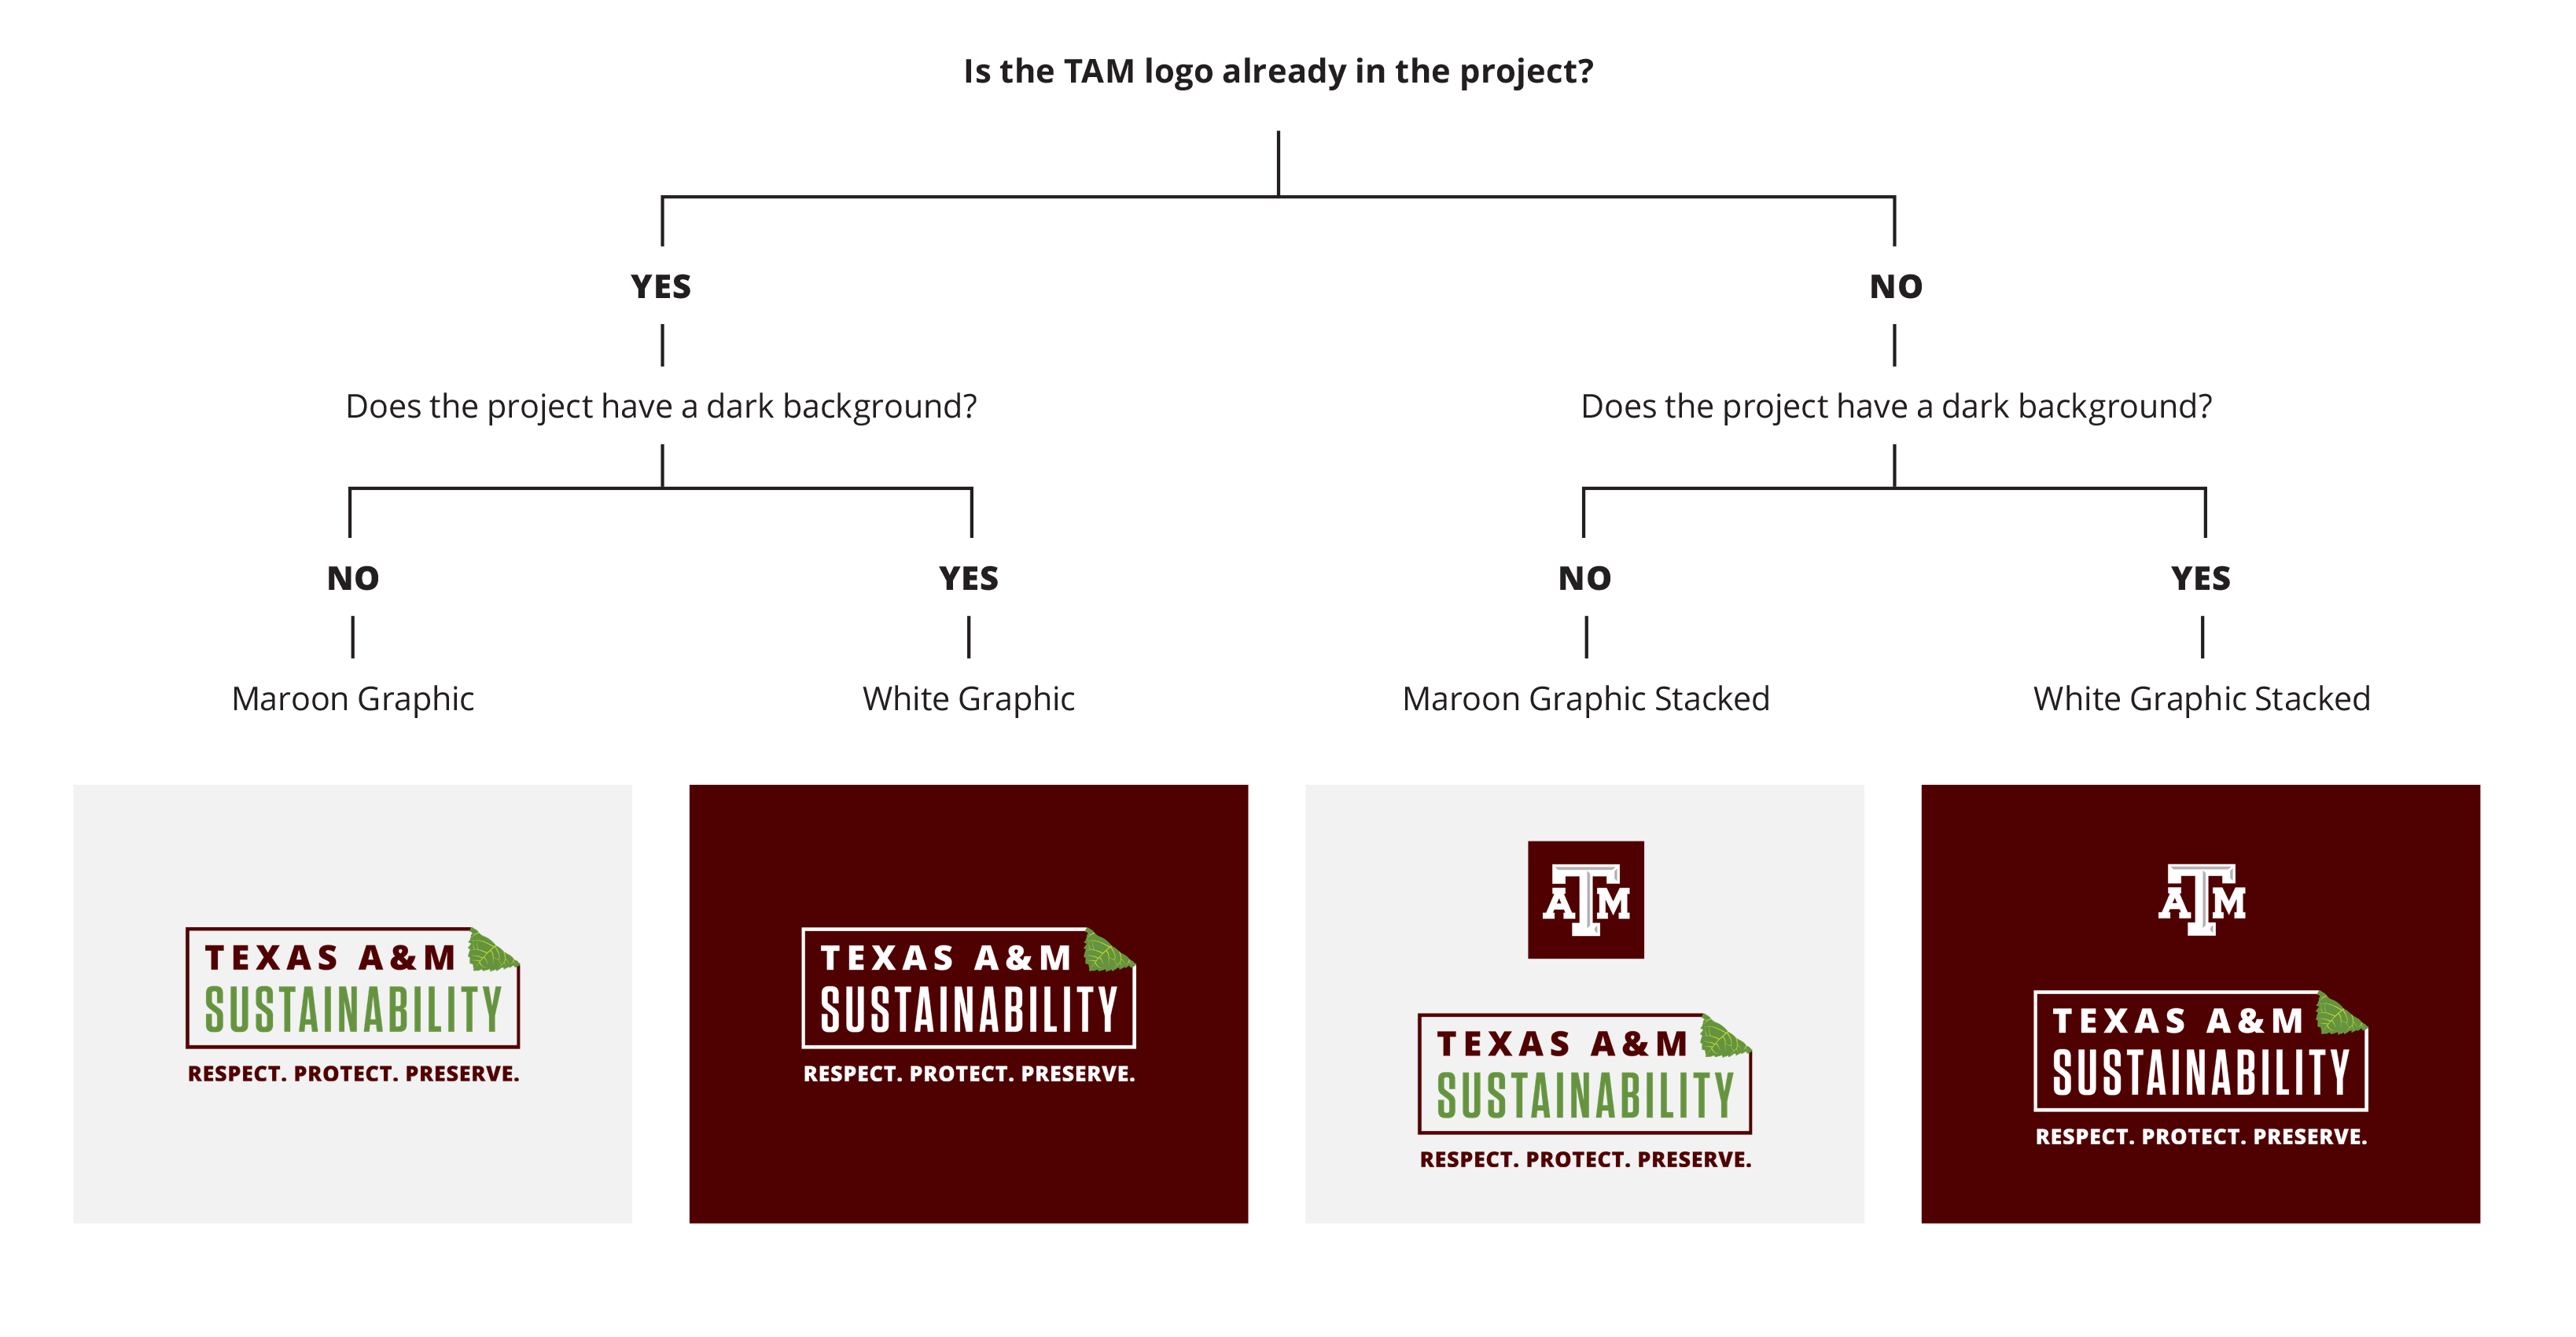 This image shows a decision tree for when and how to use both the logo lockup and the Sustainability Graphic.